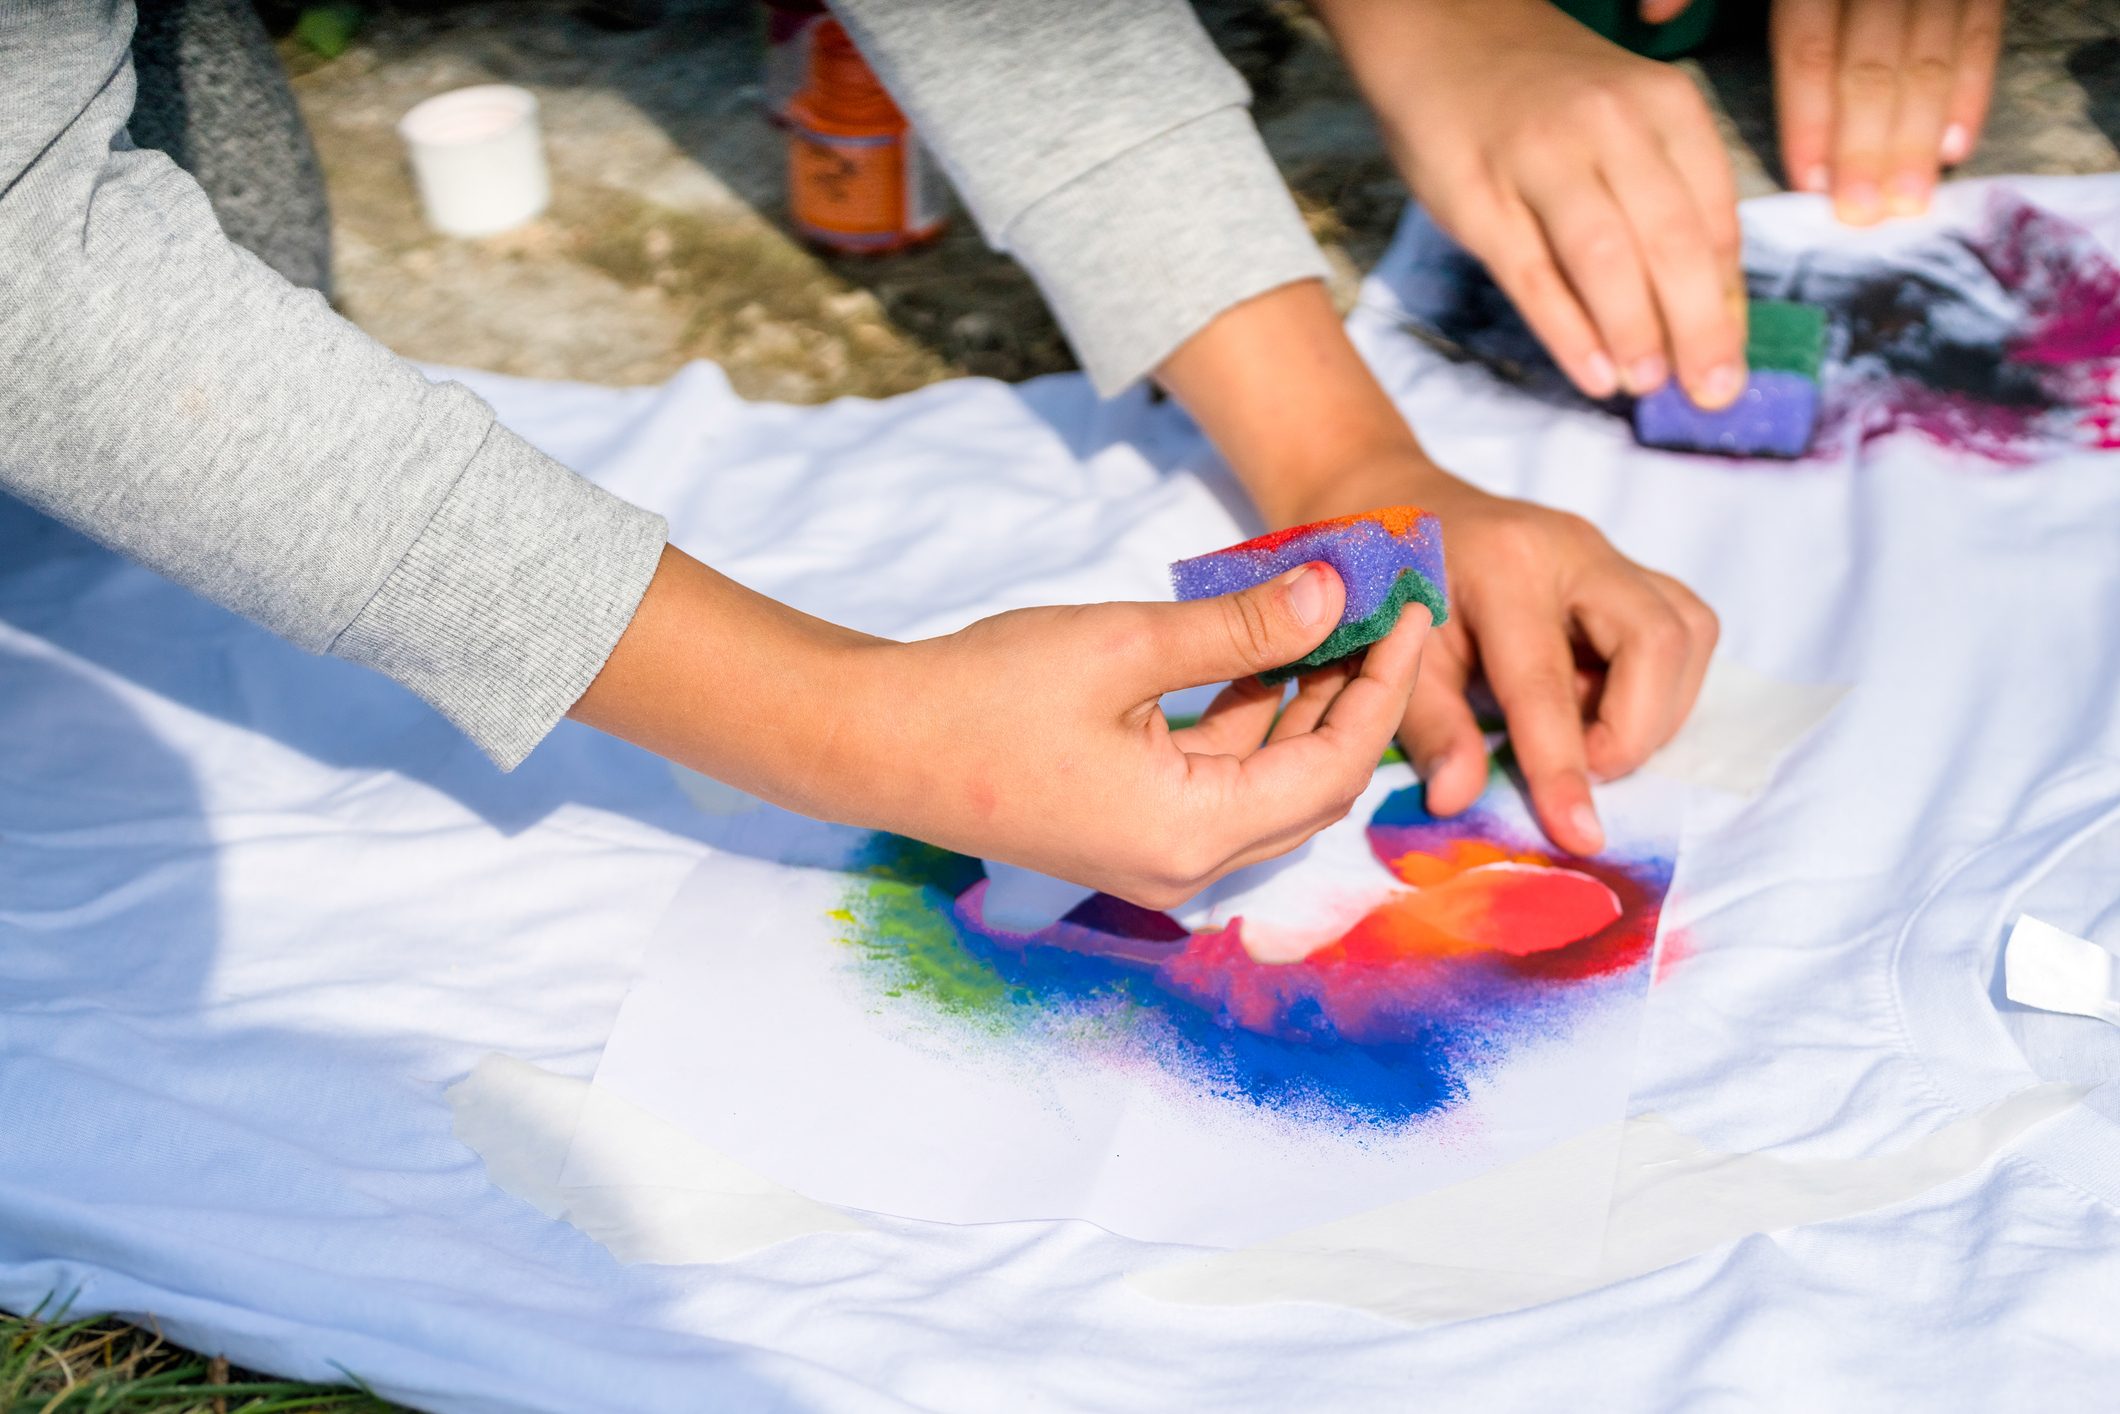 Creating your own t-shirt workshop outside. Hand applying paint on shirt